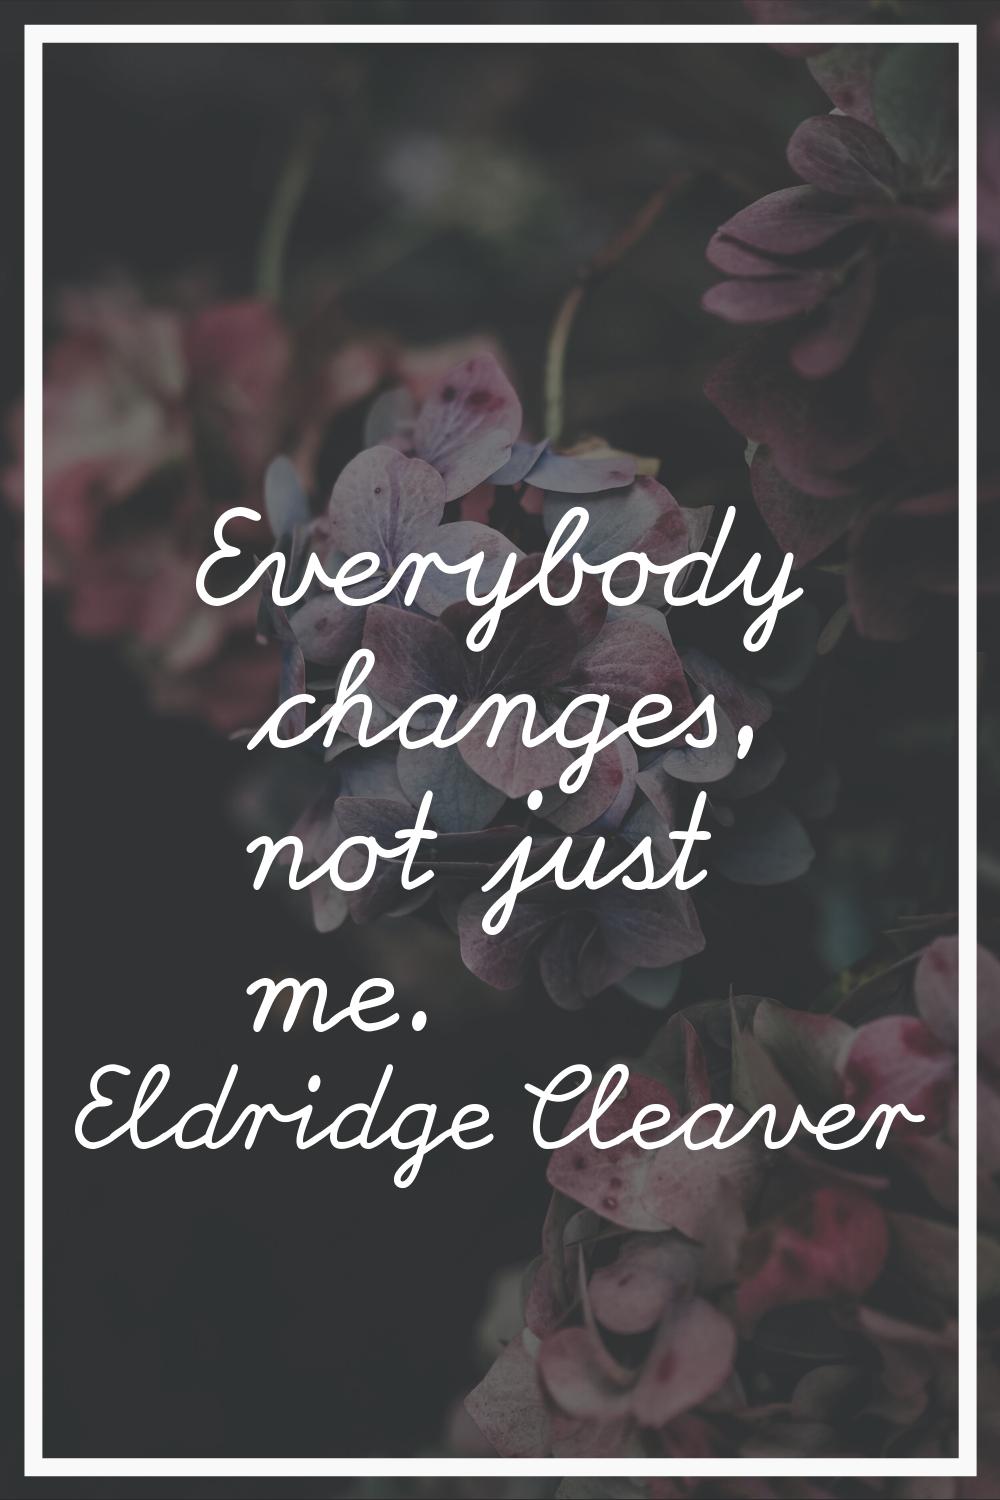 Everybody changes, not just me.